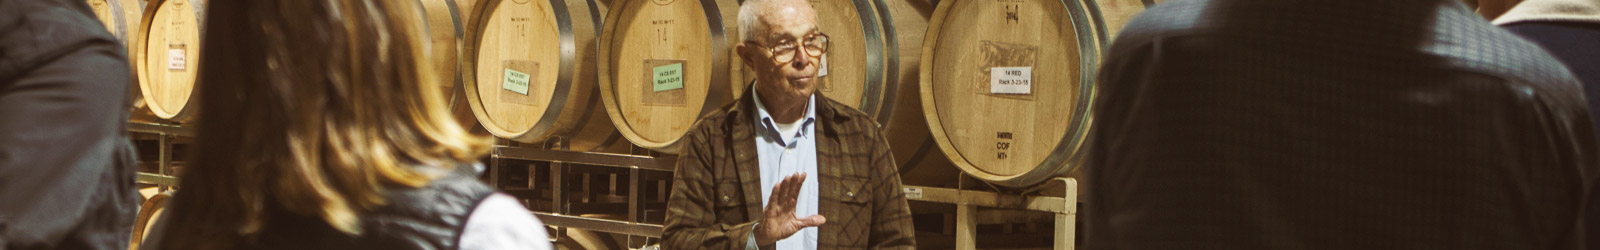 Hendry Wines - Members-Only Live Harvest Q&A with Mike Hendry!